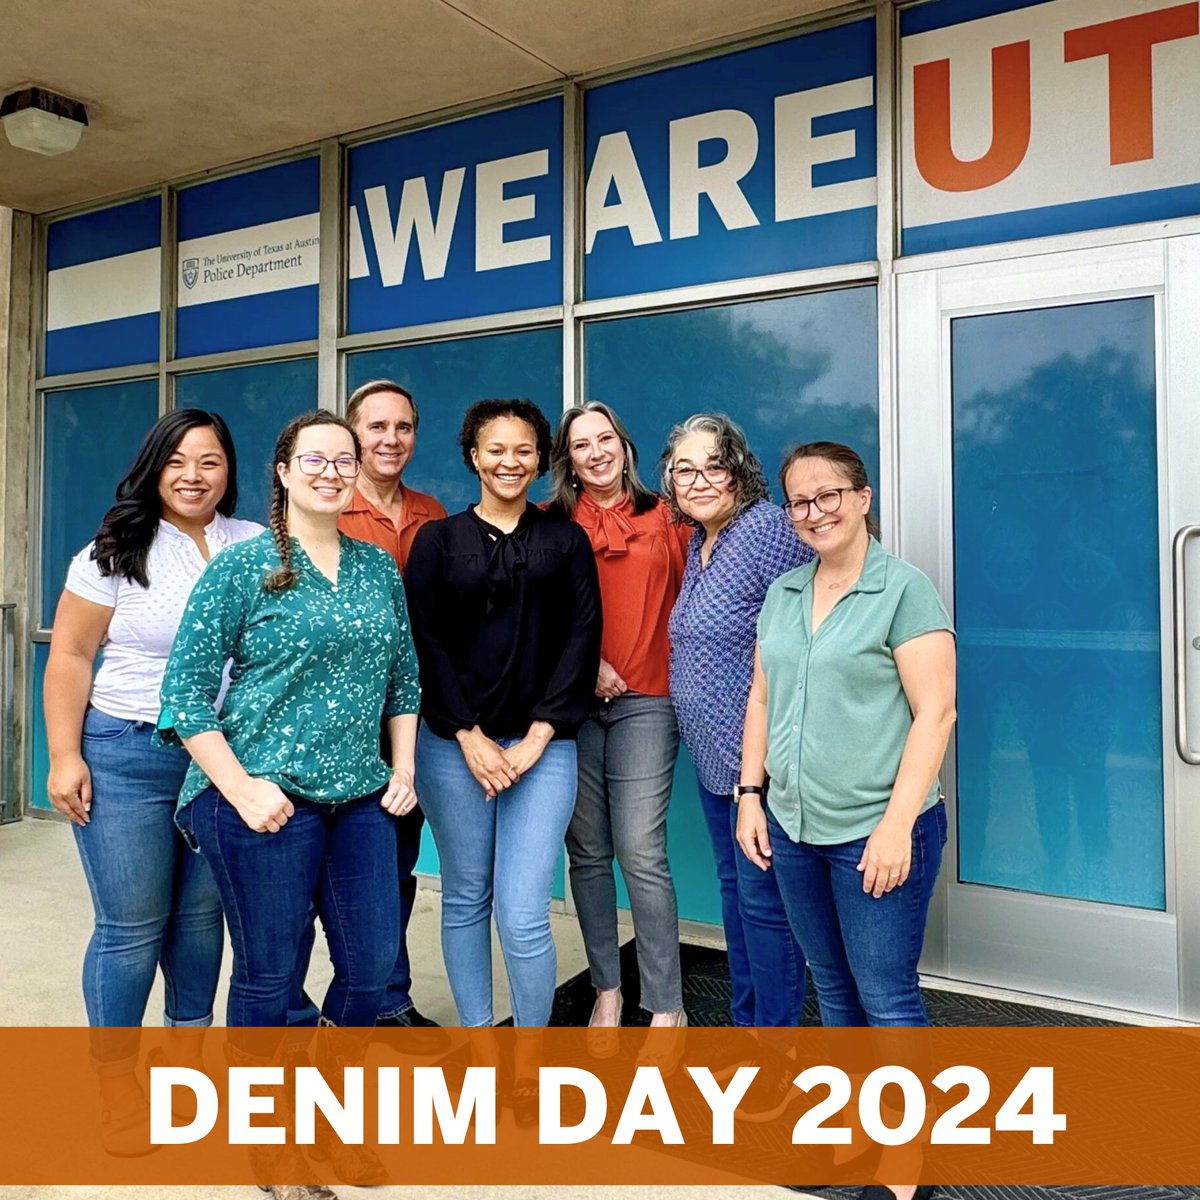 UTPD and UT's Victims Advocate Network (VAN) proudly stand with survivors of sexual assault this Denim Day. Together, we raise awareness, support, and solidarity for those affected. #DenimDay #SupportSurvivors #EndSexualViolence